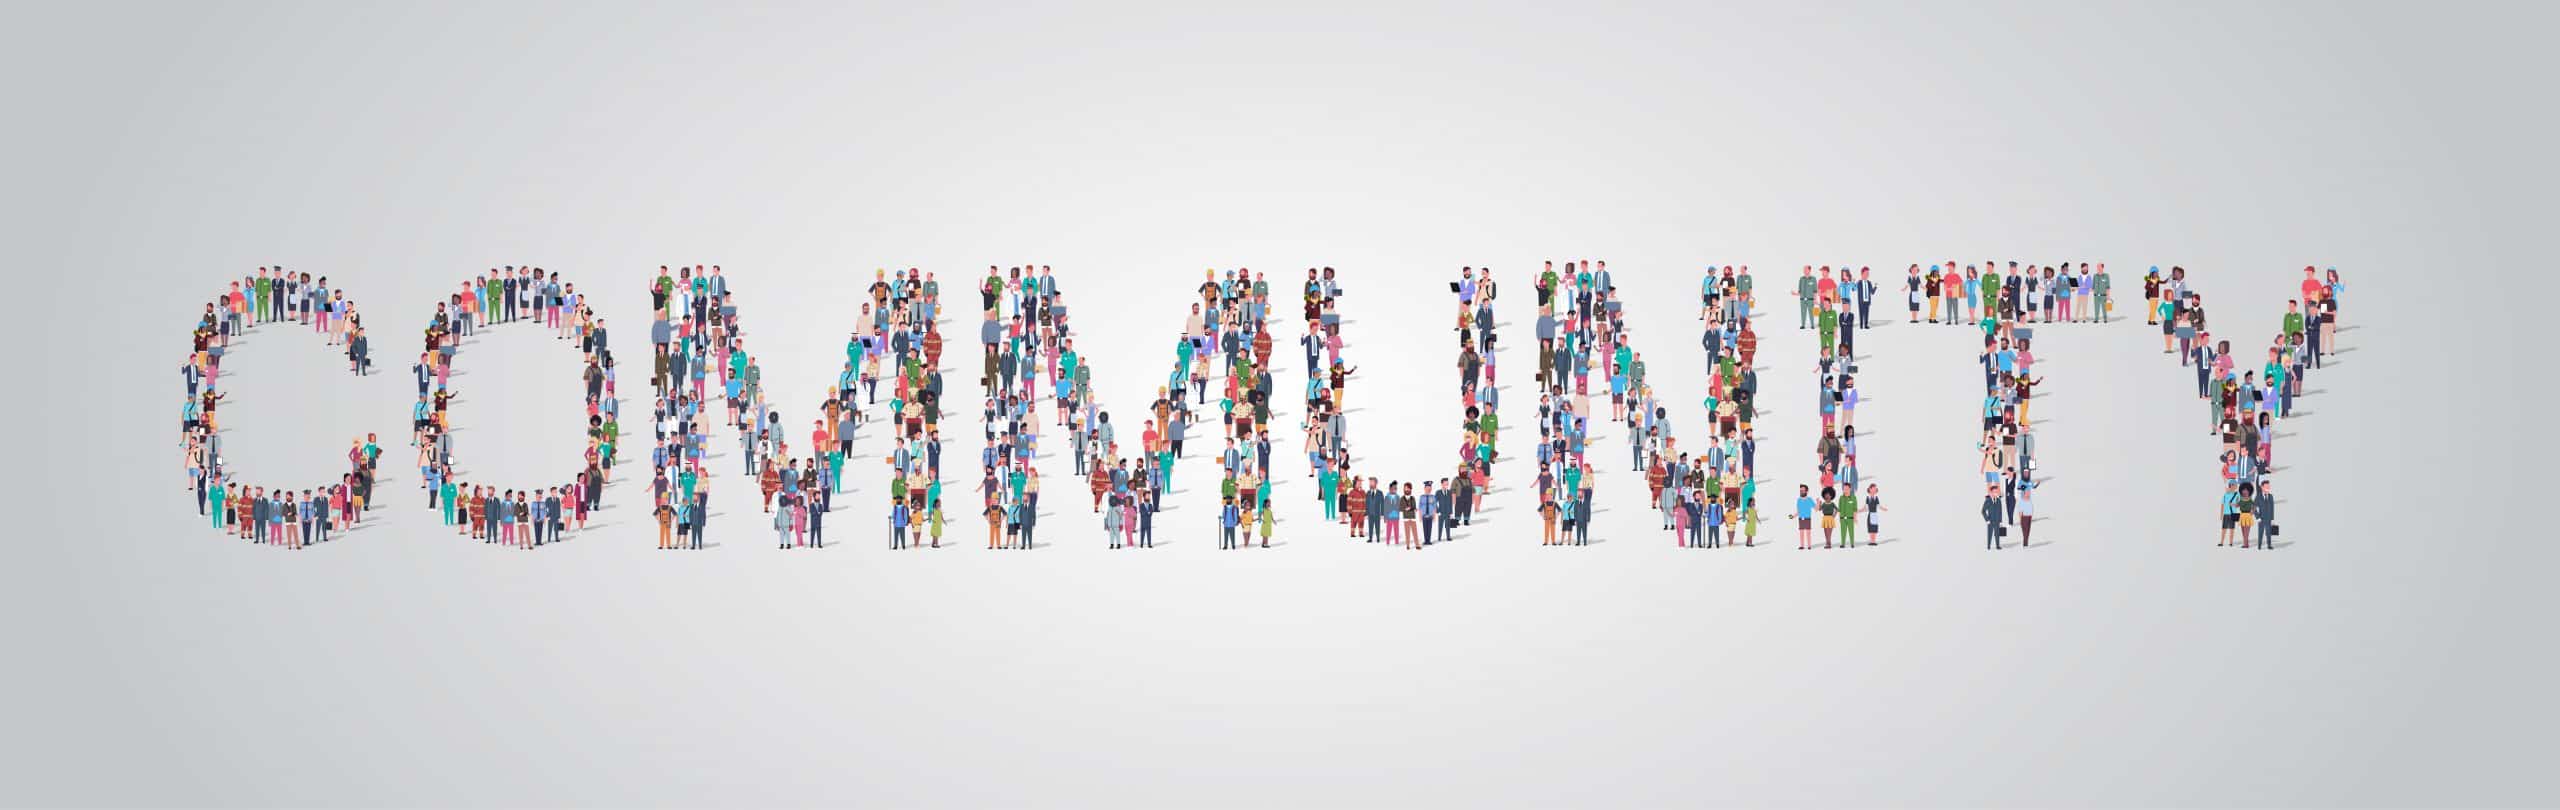 people crowd gathering in shape of community word different occupation employees mix race workers group standing together social media communication concept flat horizontal vector illustration